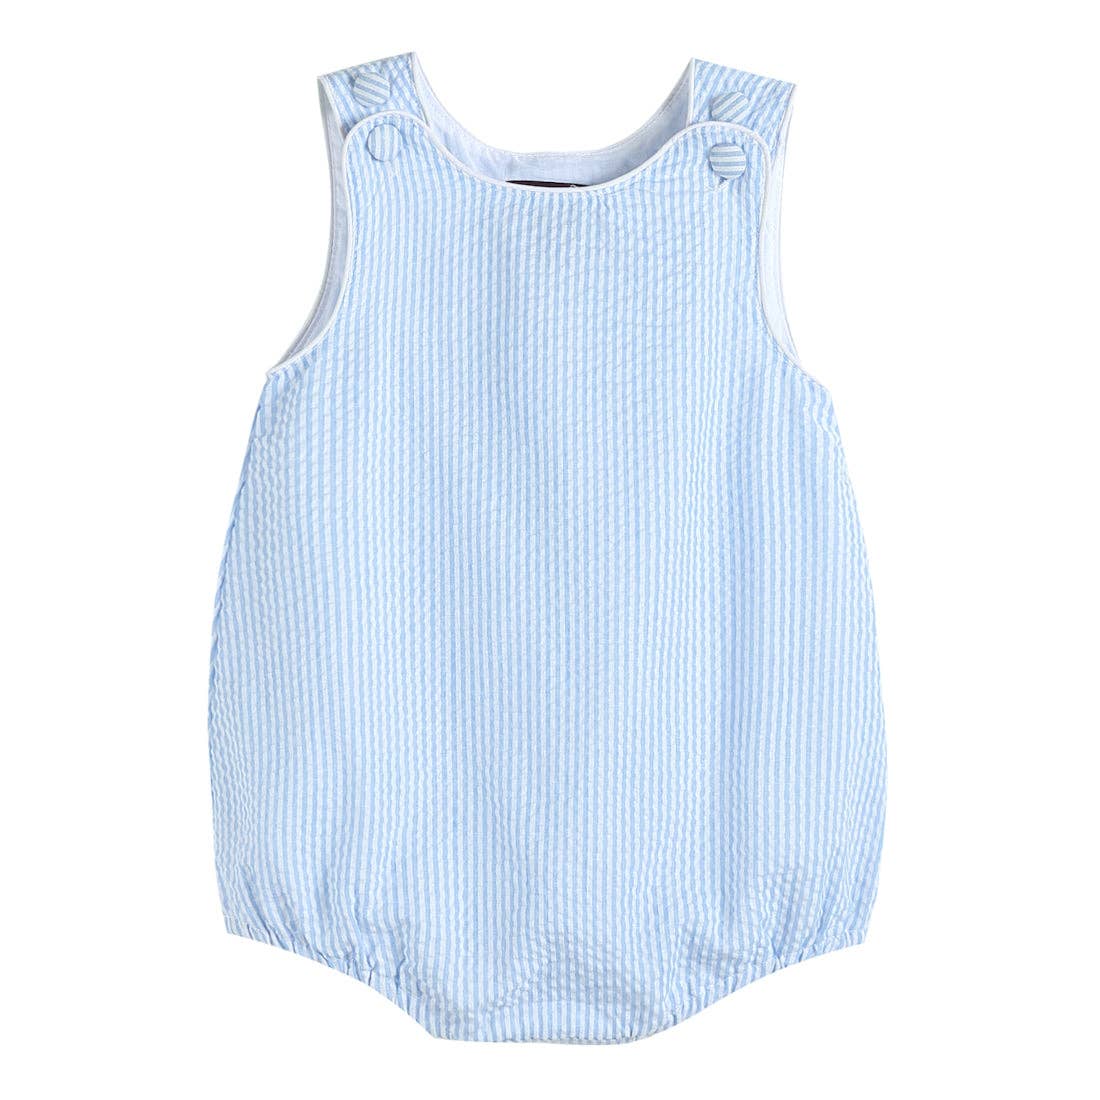 An adorable baby boy's Lil Cactus Classic Light Blue Seersucker Bubble Romper: 12-18M made of soft cotton, showcasing cute details on a white background.